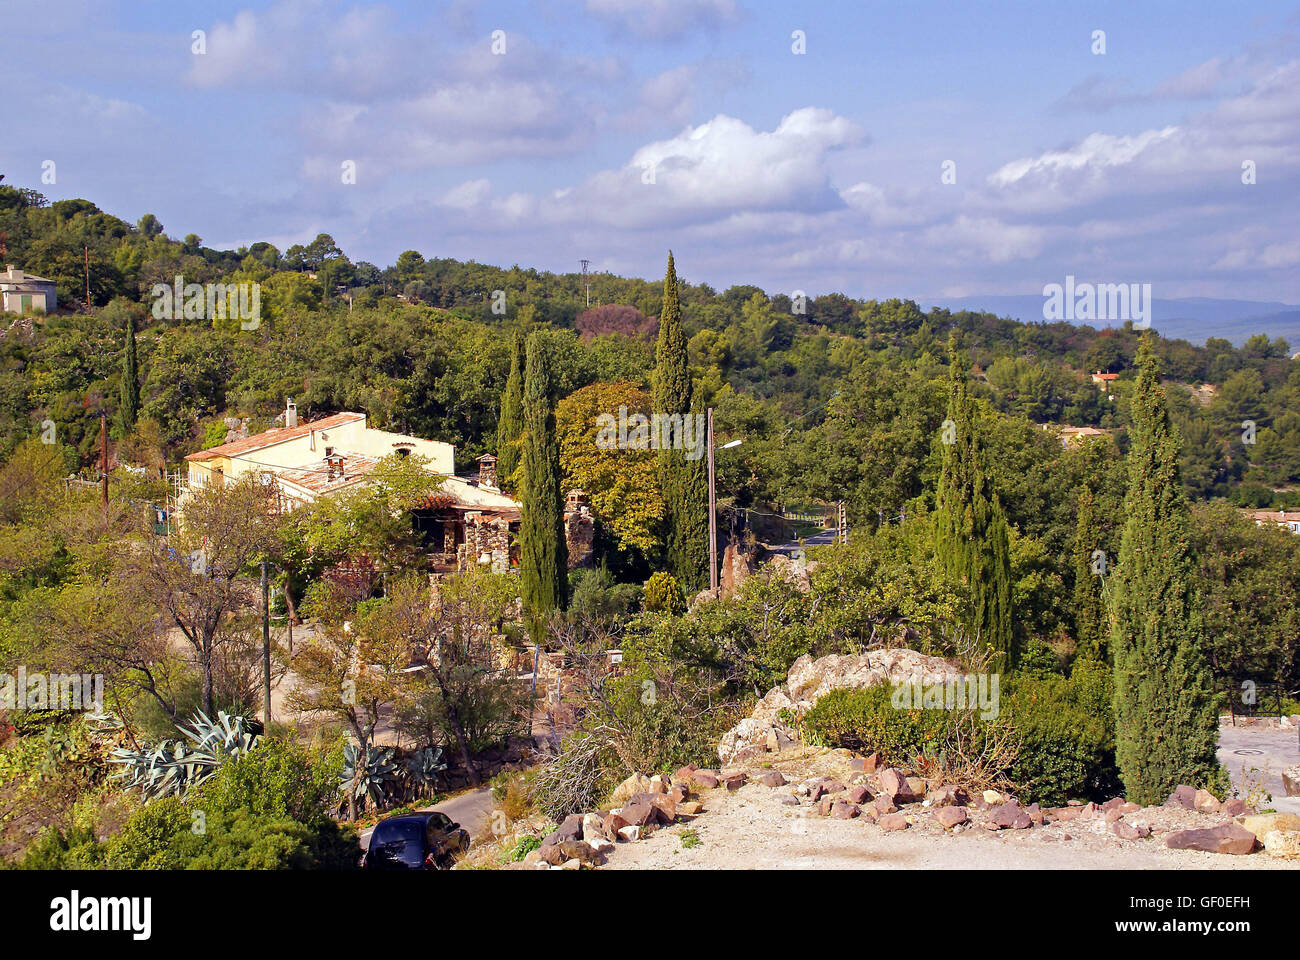 Village Provençale High Resolution Stock Photography and Images - Alamy